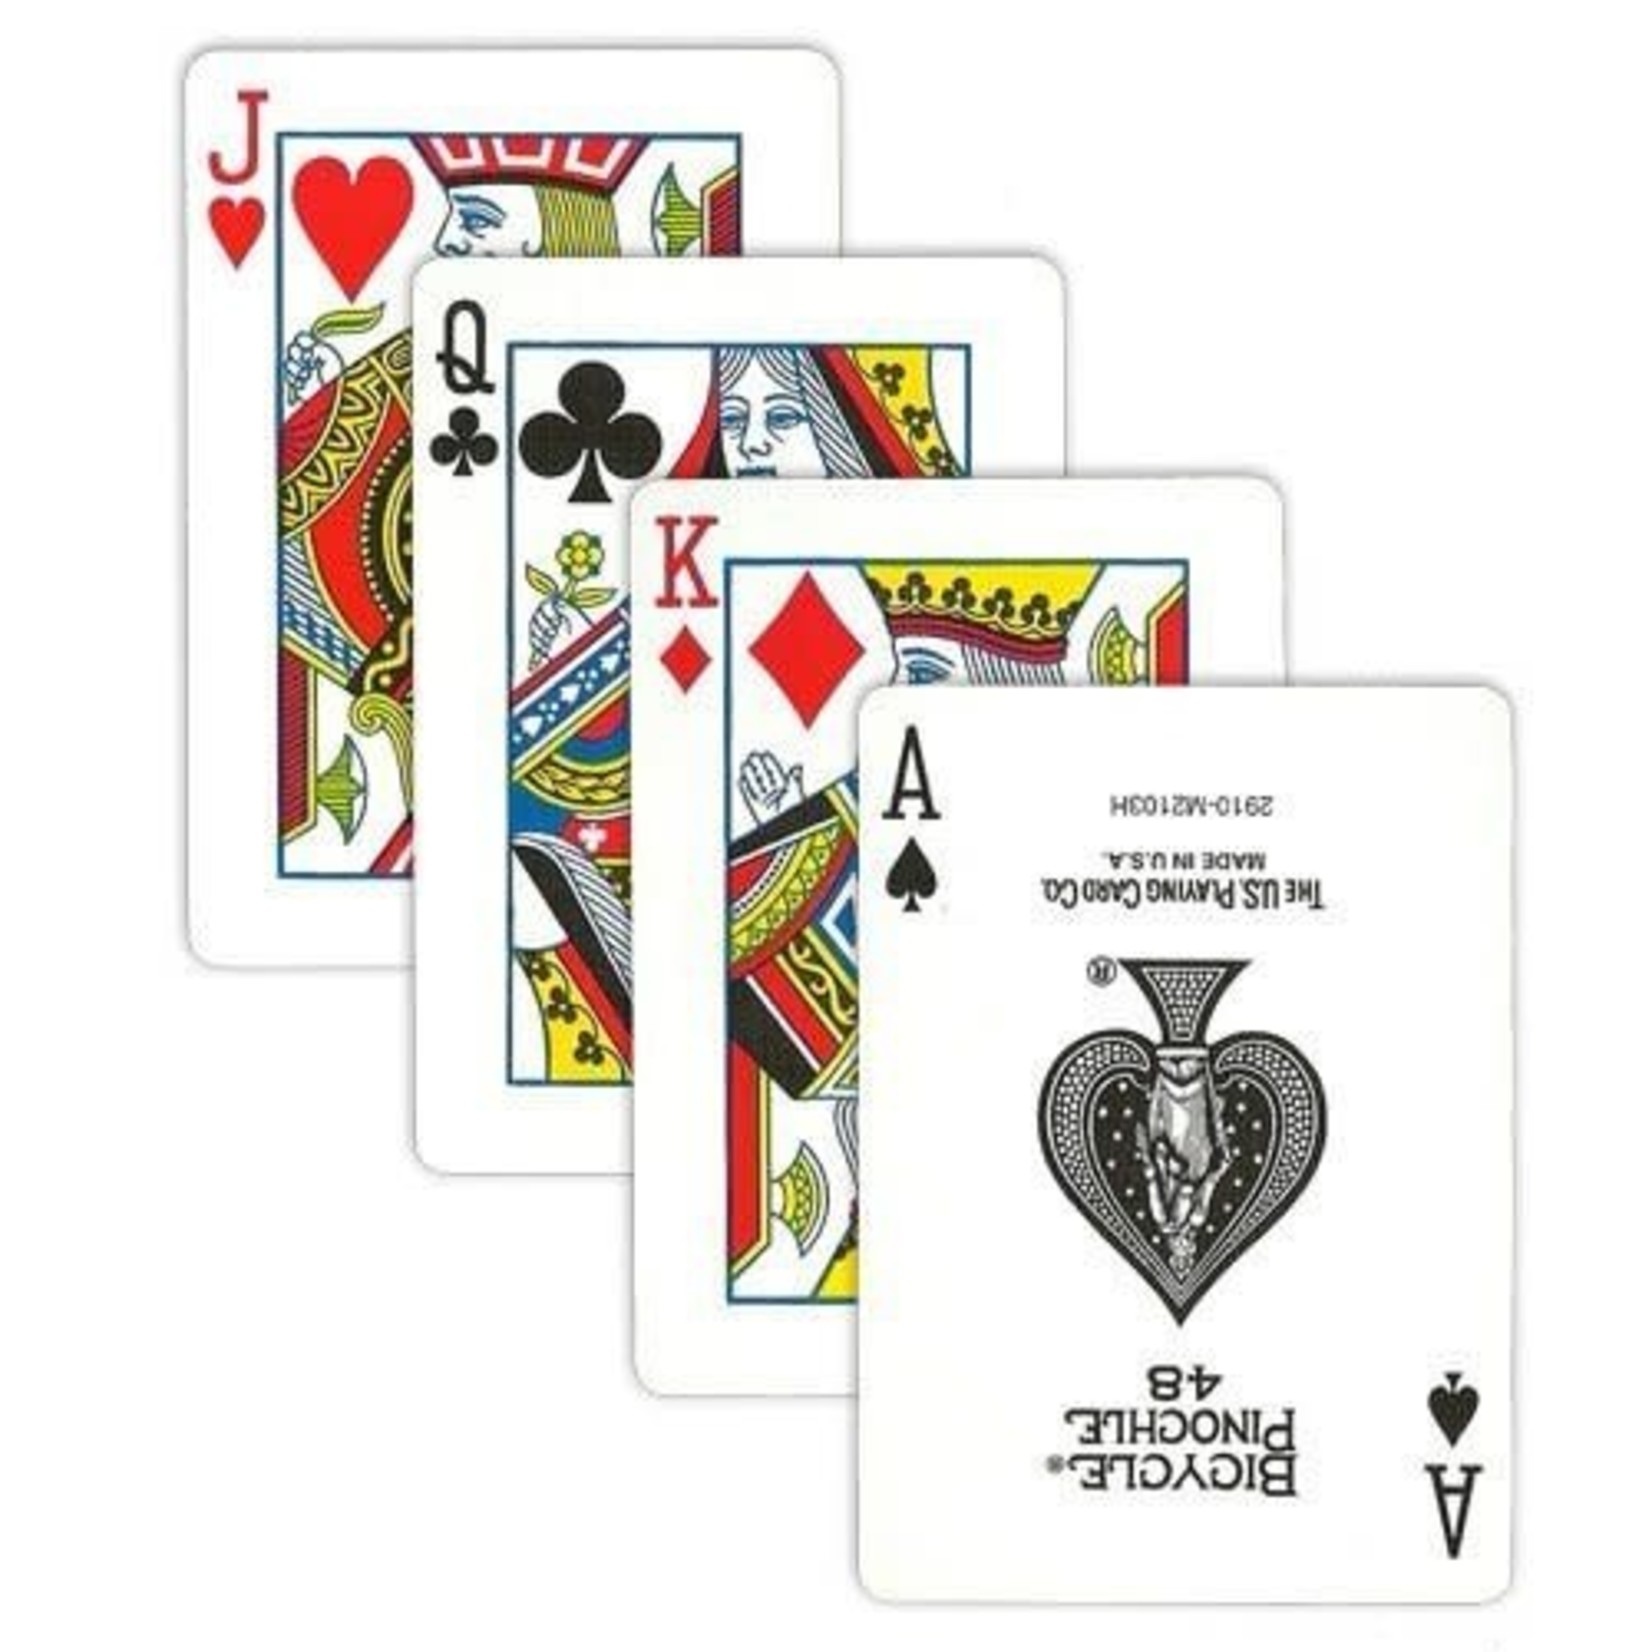 The United States Playing Card Company Bicycle Pinochle Standard